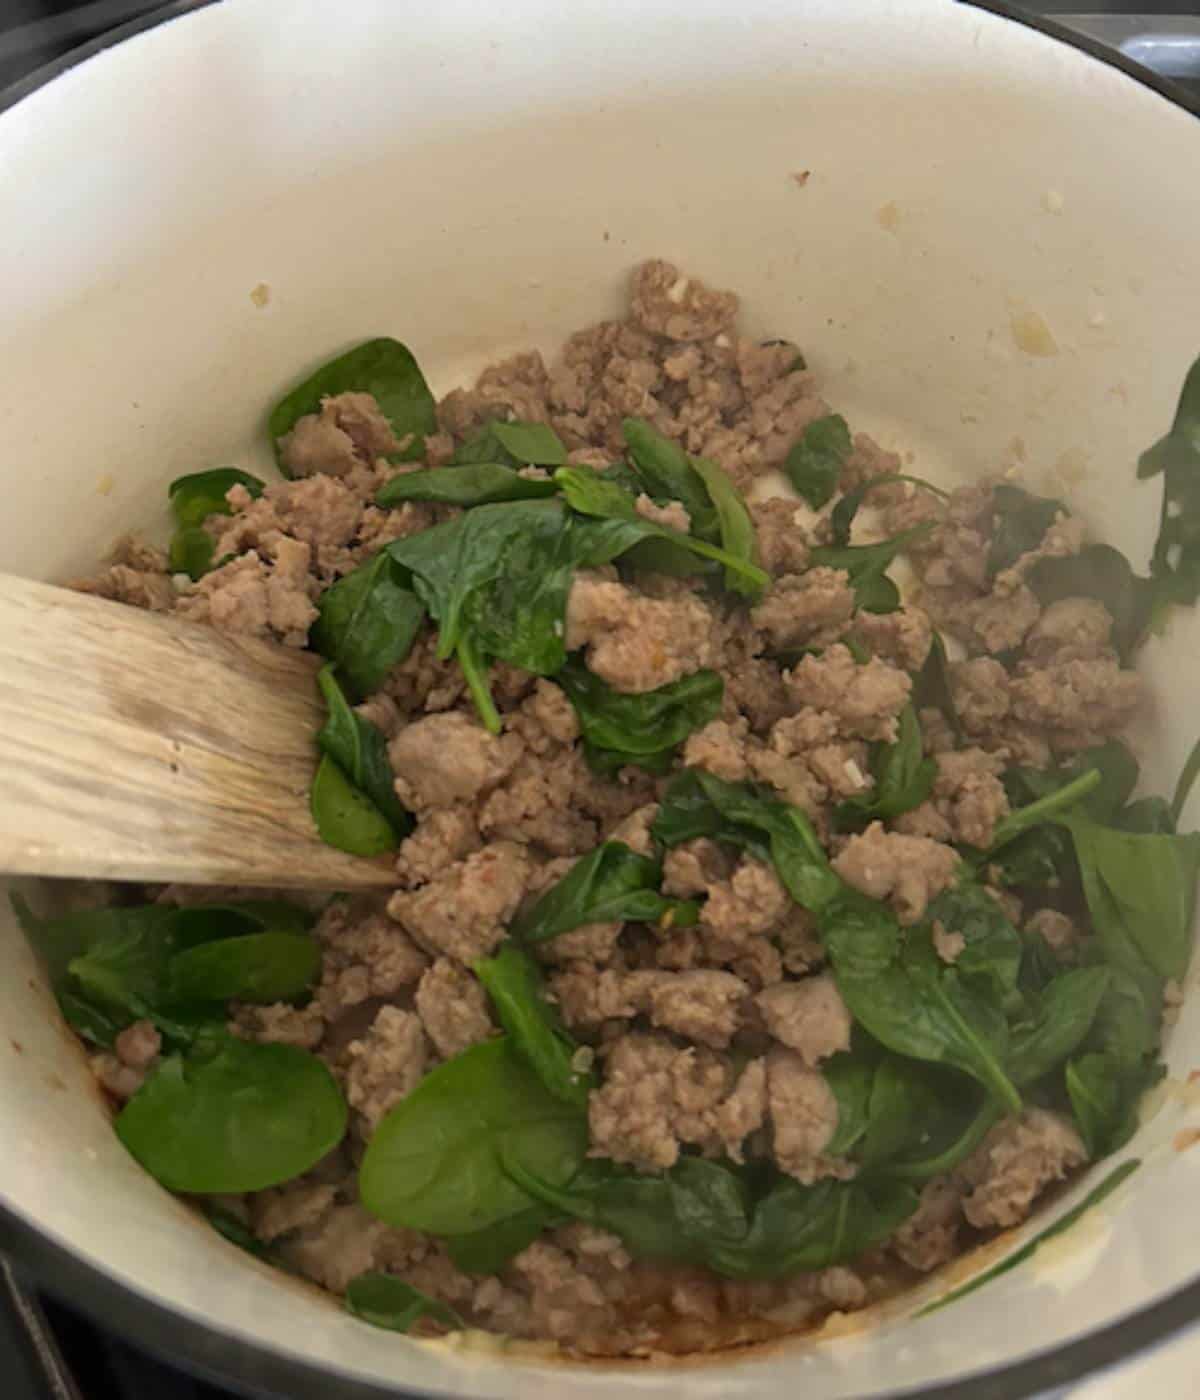 Spinach added to sausage.